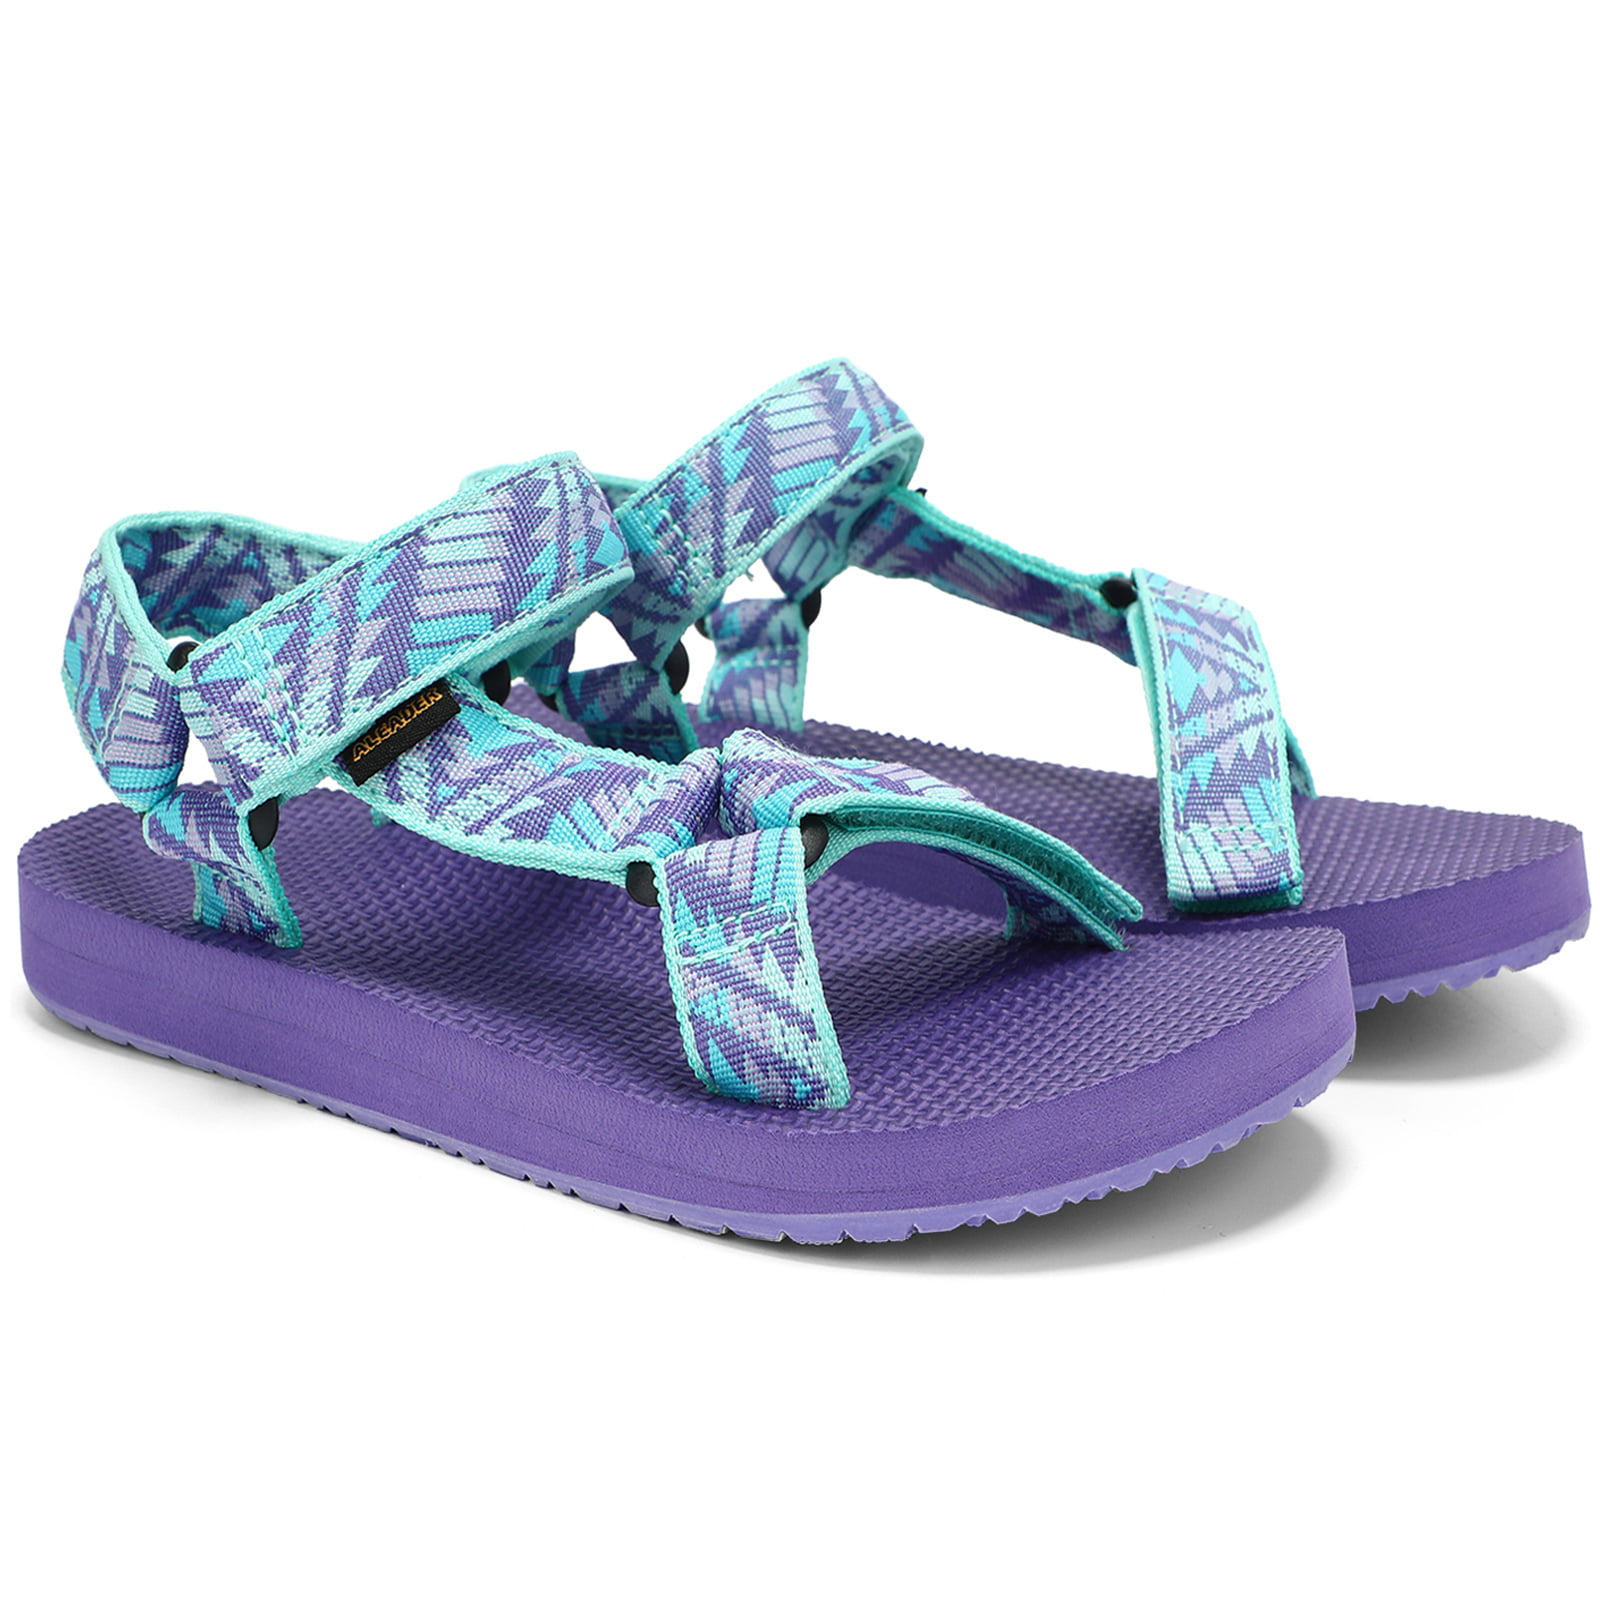 Soft Lilac & Sky Blue Pastel Colours Casual Clogs Slip On Holiday/Beach Sandals 